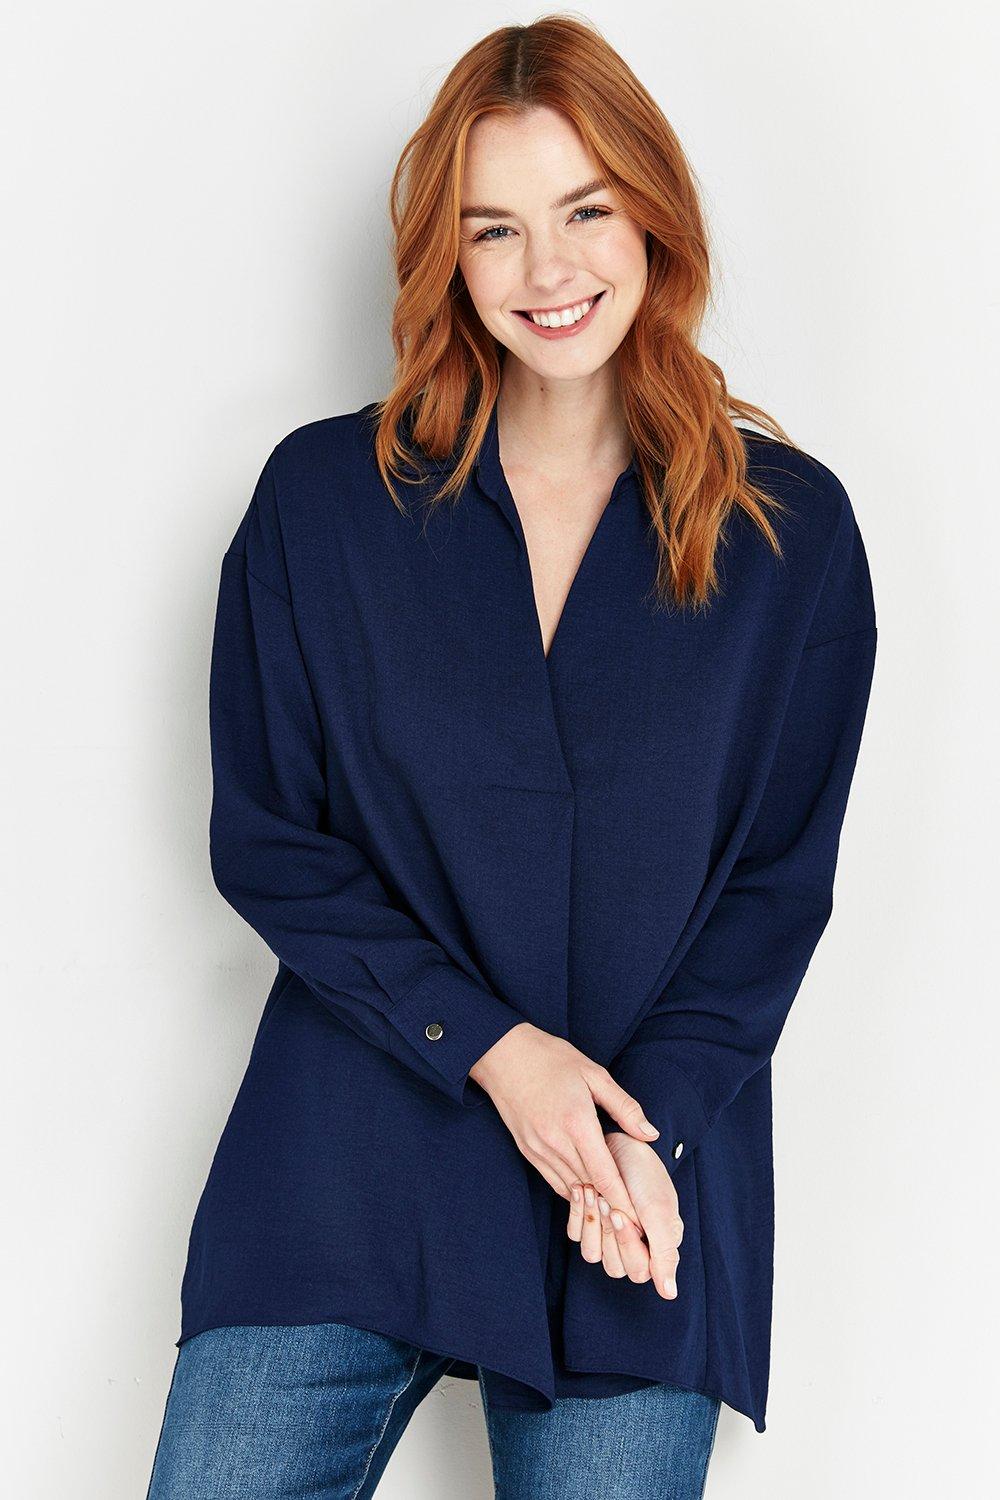 The Versatile Shirt To Add To Your Collection. A Deep Navy Hue Is Timeless And Easy To Pair, Whilst A Relaxed Floaty Fit Means This Can Be Dressed Up Or Down With Ease.  Shirt V-Neck Long Sleeve Relaxed Casual 100% Polyester. Machine Washable.